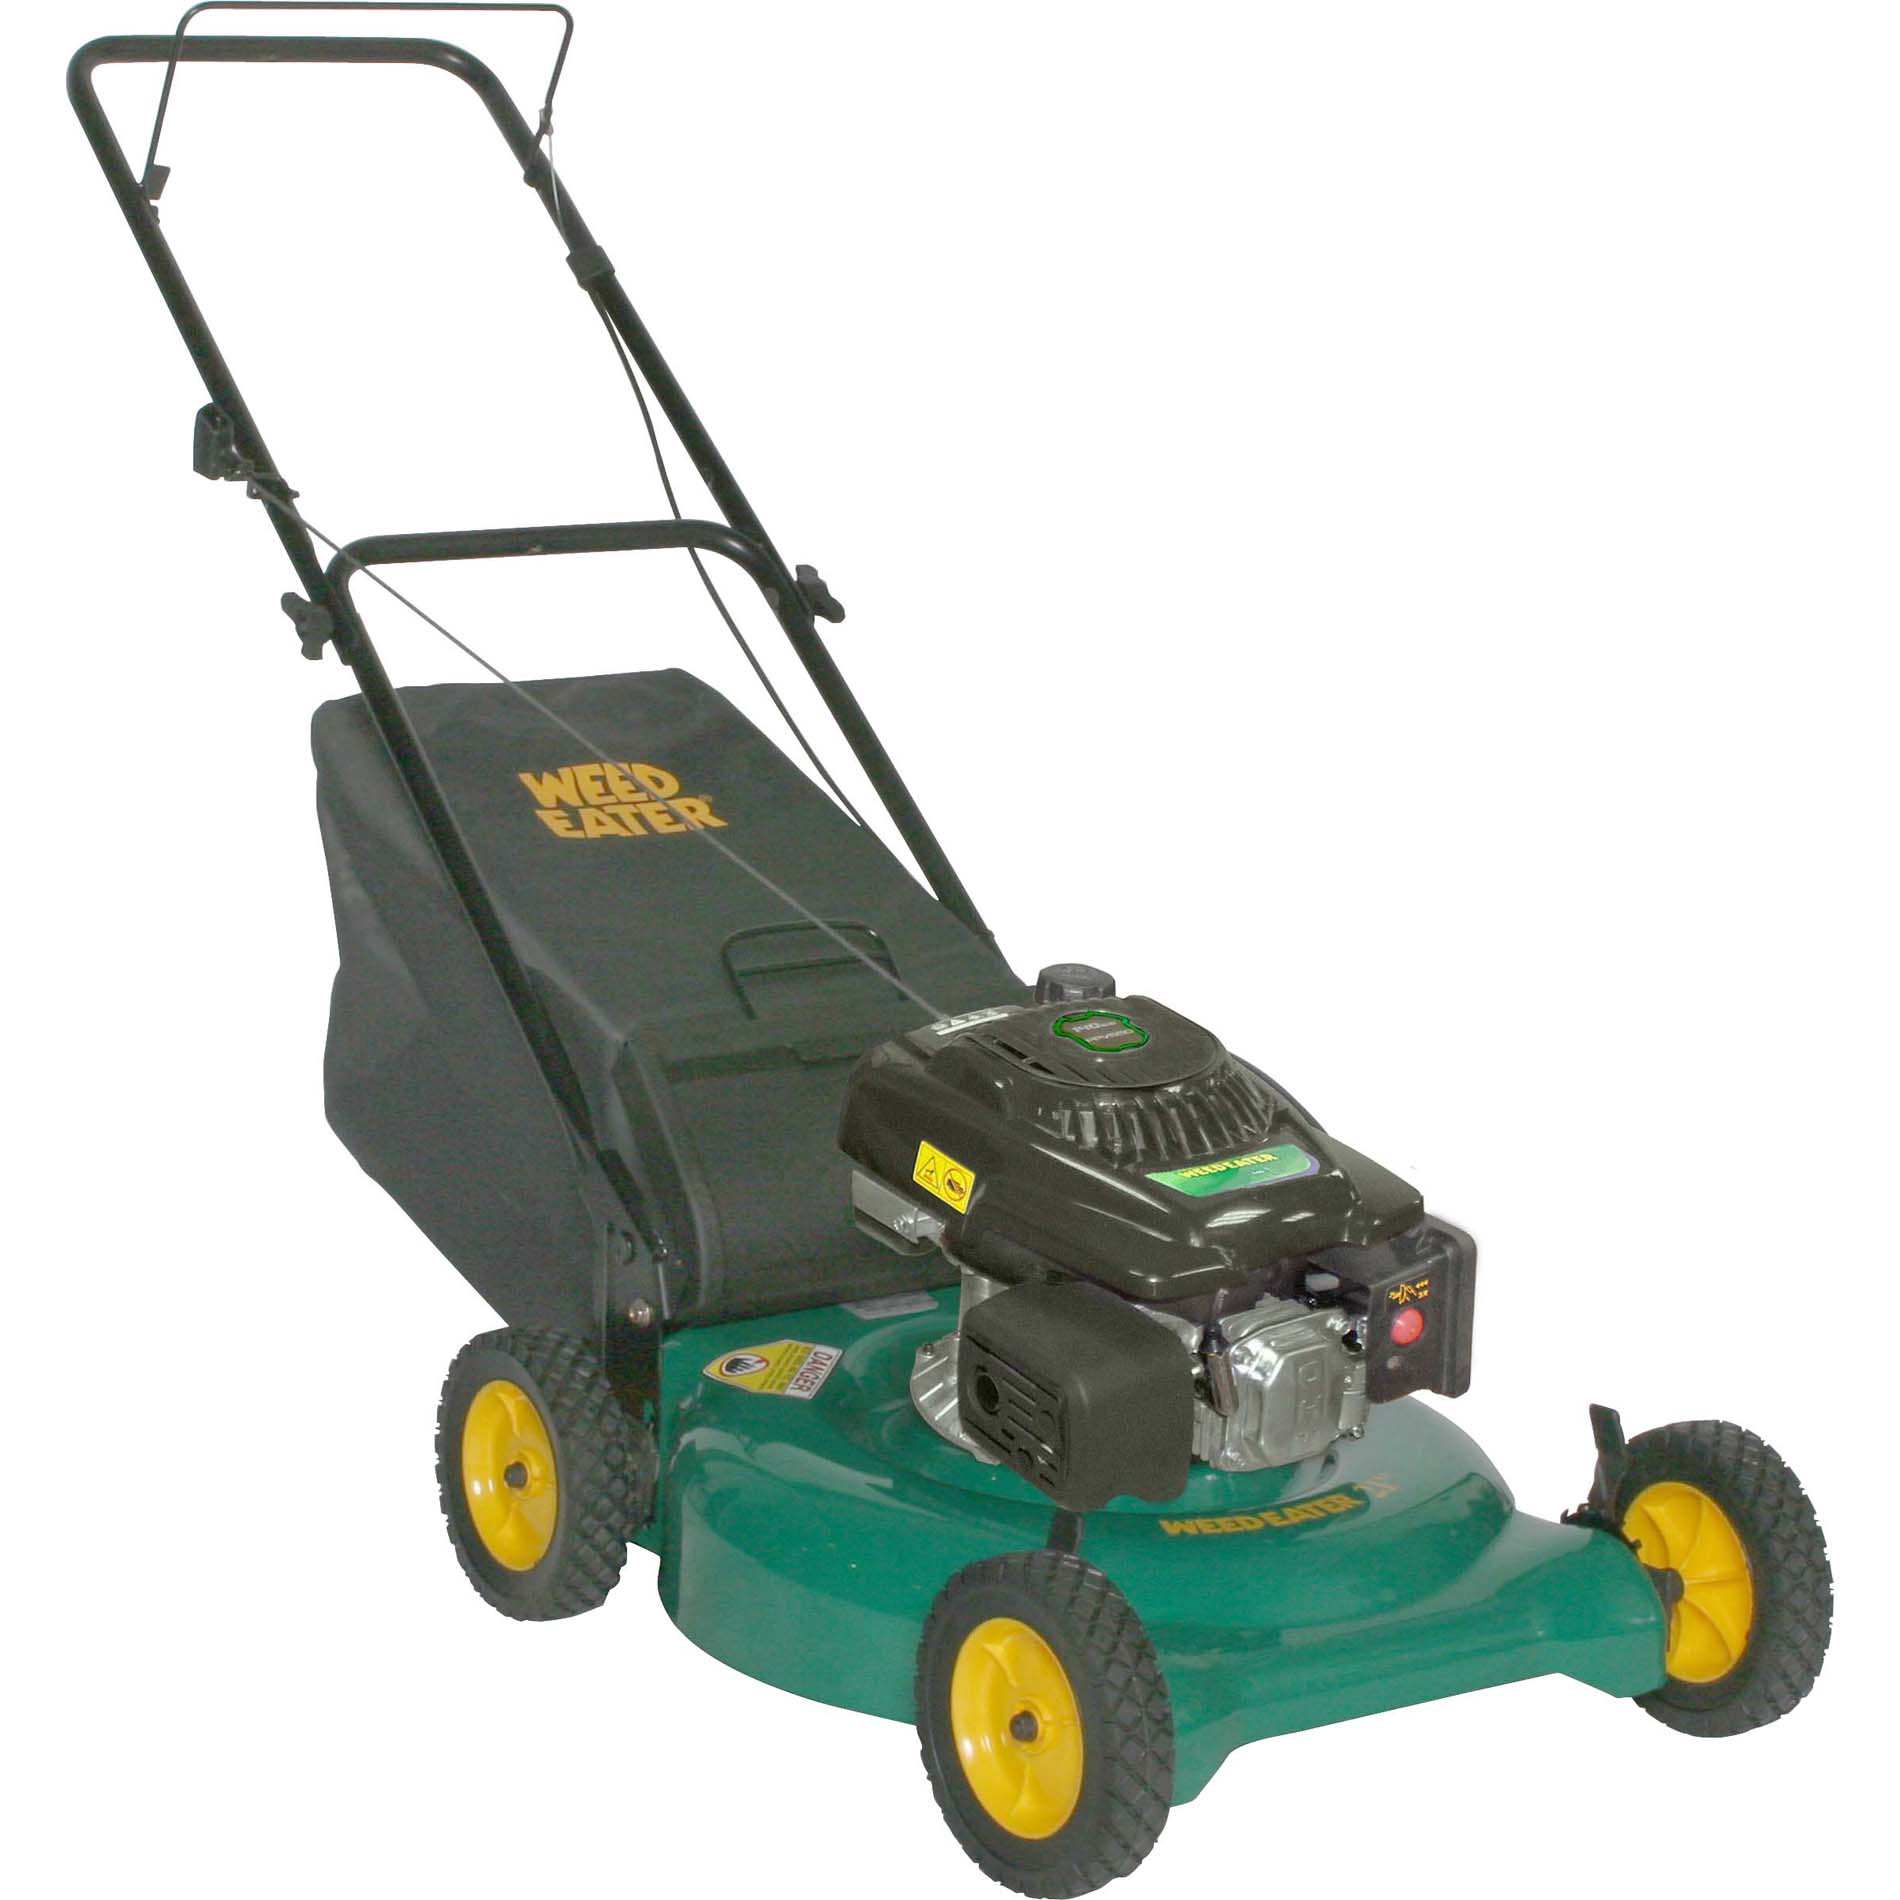 Briggs Stratton Weedeater 300 Manual